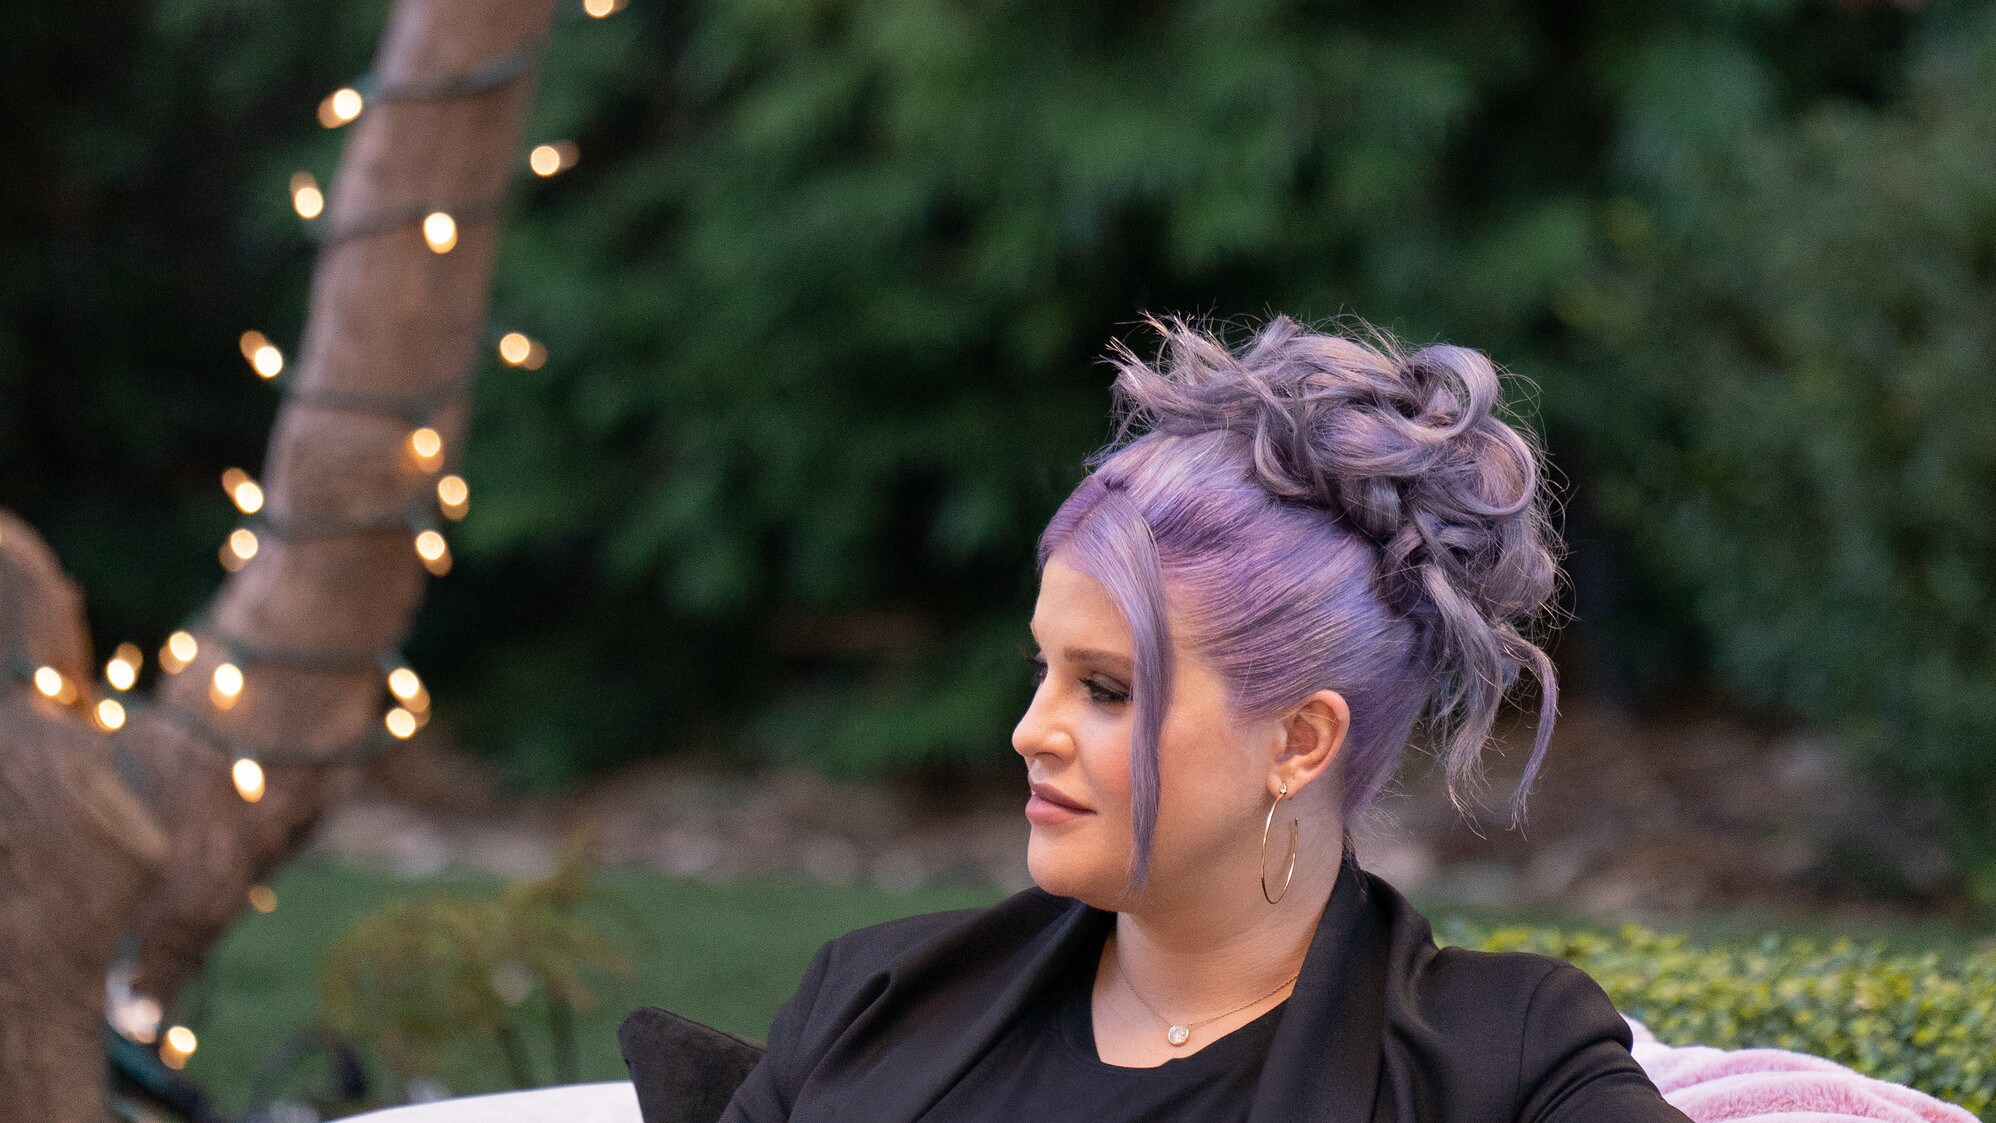 Kelly Osbourne on Turning the Tables with Robin Roberts. In season 2 of Turning the Tables with Robin Roberts, Robin Roberts gets personal with a new group of Hollywood's iconic women as they bear witness to their incredible journeys on their path to purpose. (Disney/Ser Baffo)